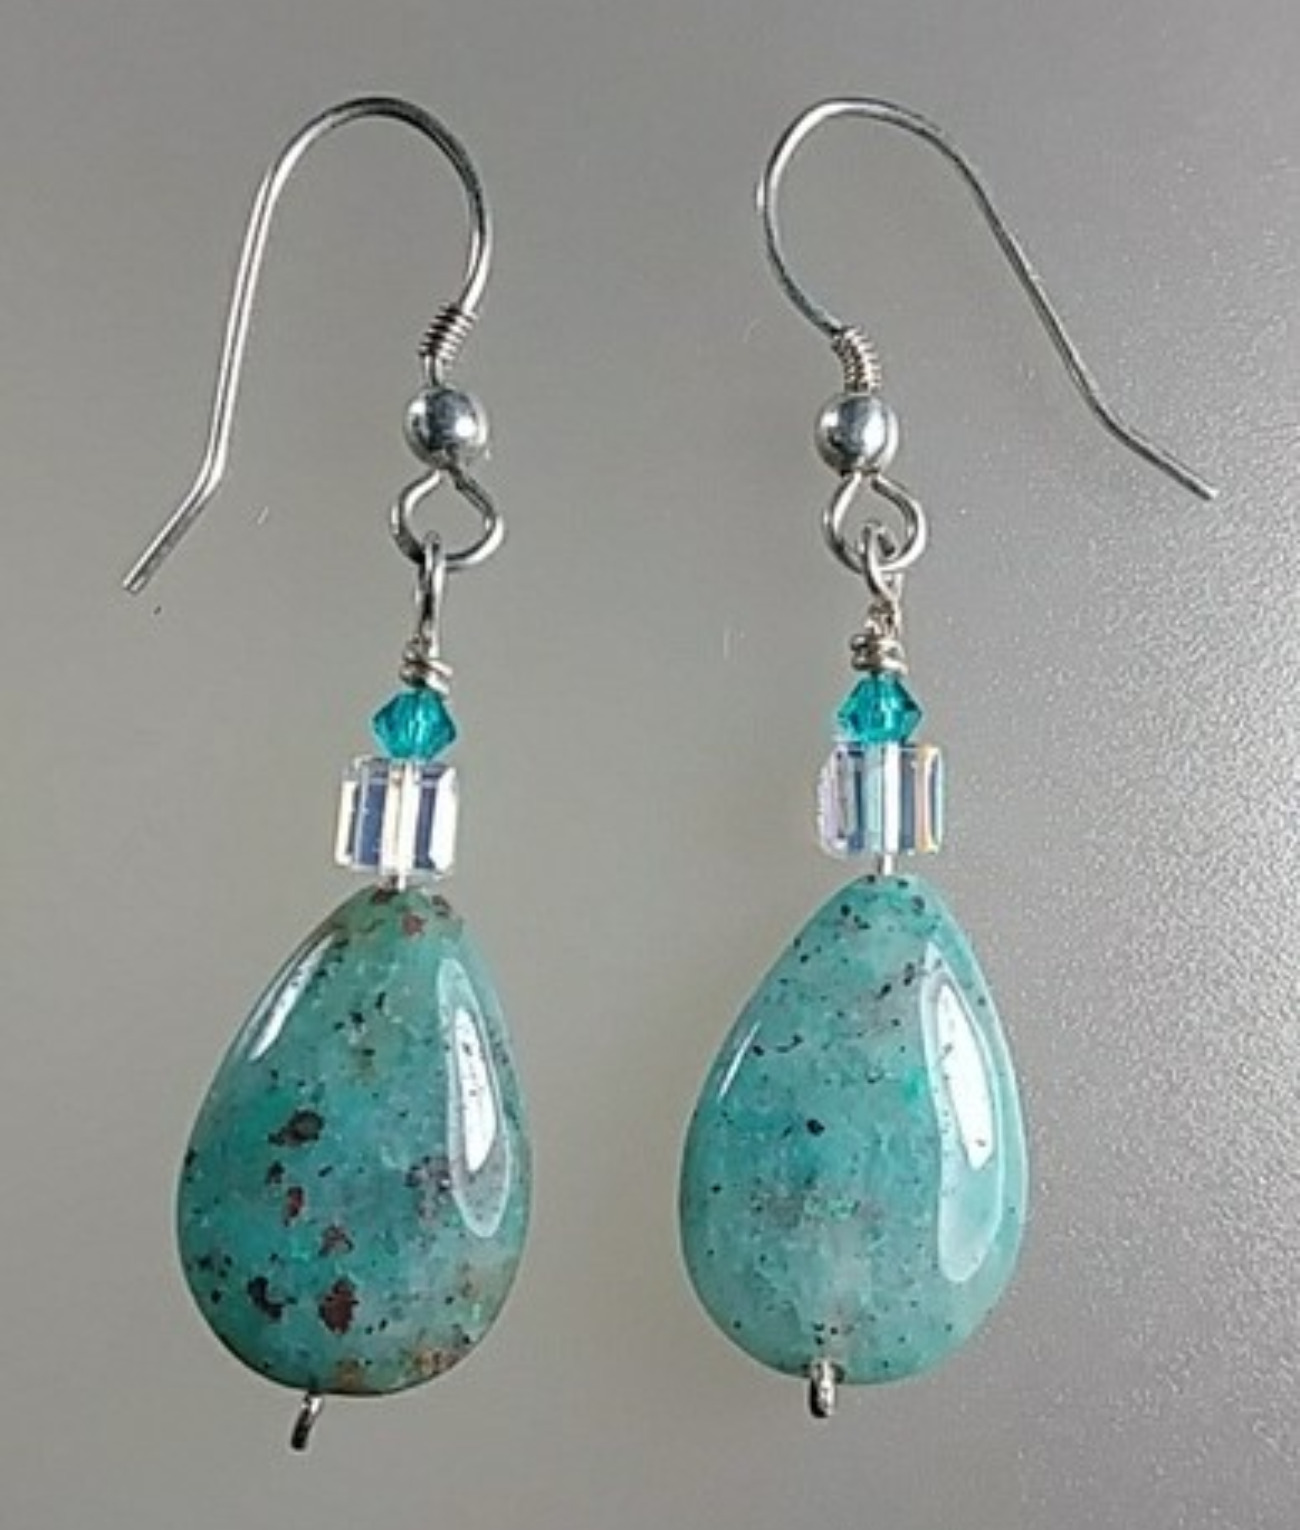 619 - EAR - Description: Earrings: Sterling Silver, Turquoise Gemstones and Swarovski Crystal Beads (Sterling Silver Earwire)  Dimension: 2 ' L (Inches)﻿